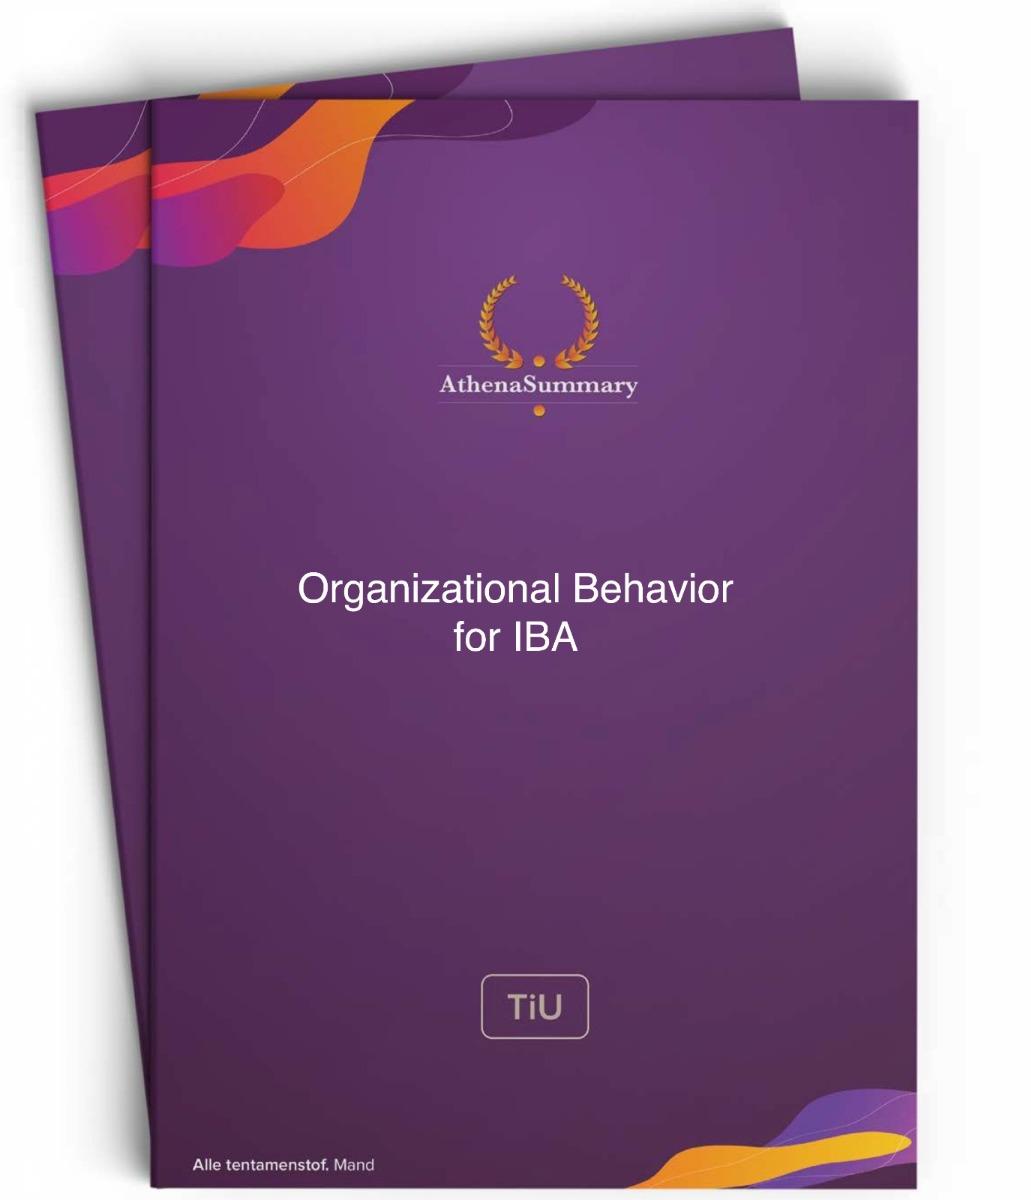 Literature and Lecture Summary: Organizational Behavior for IBA